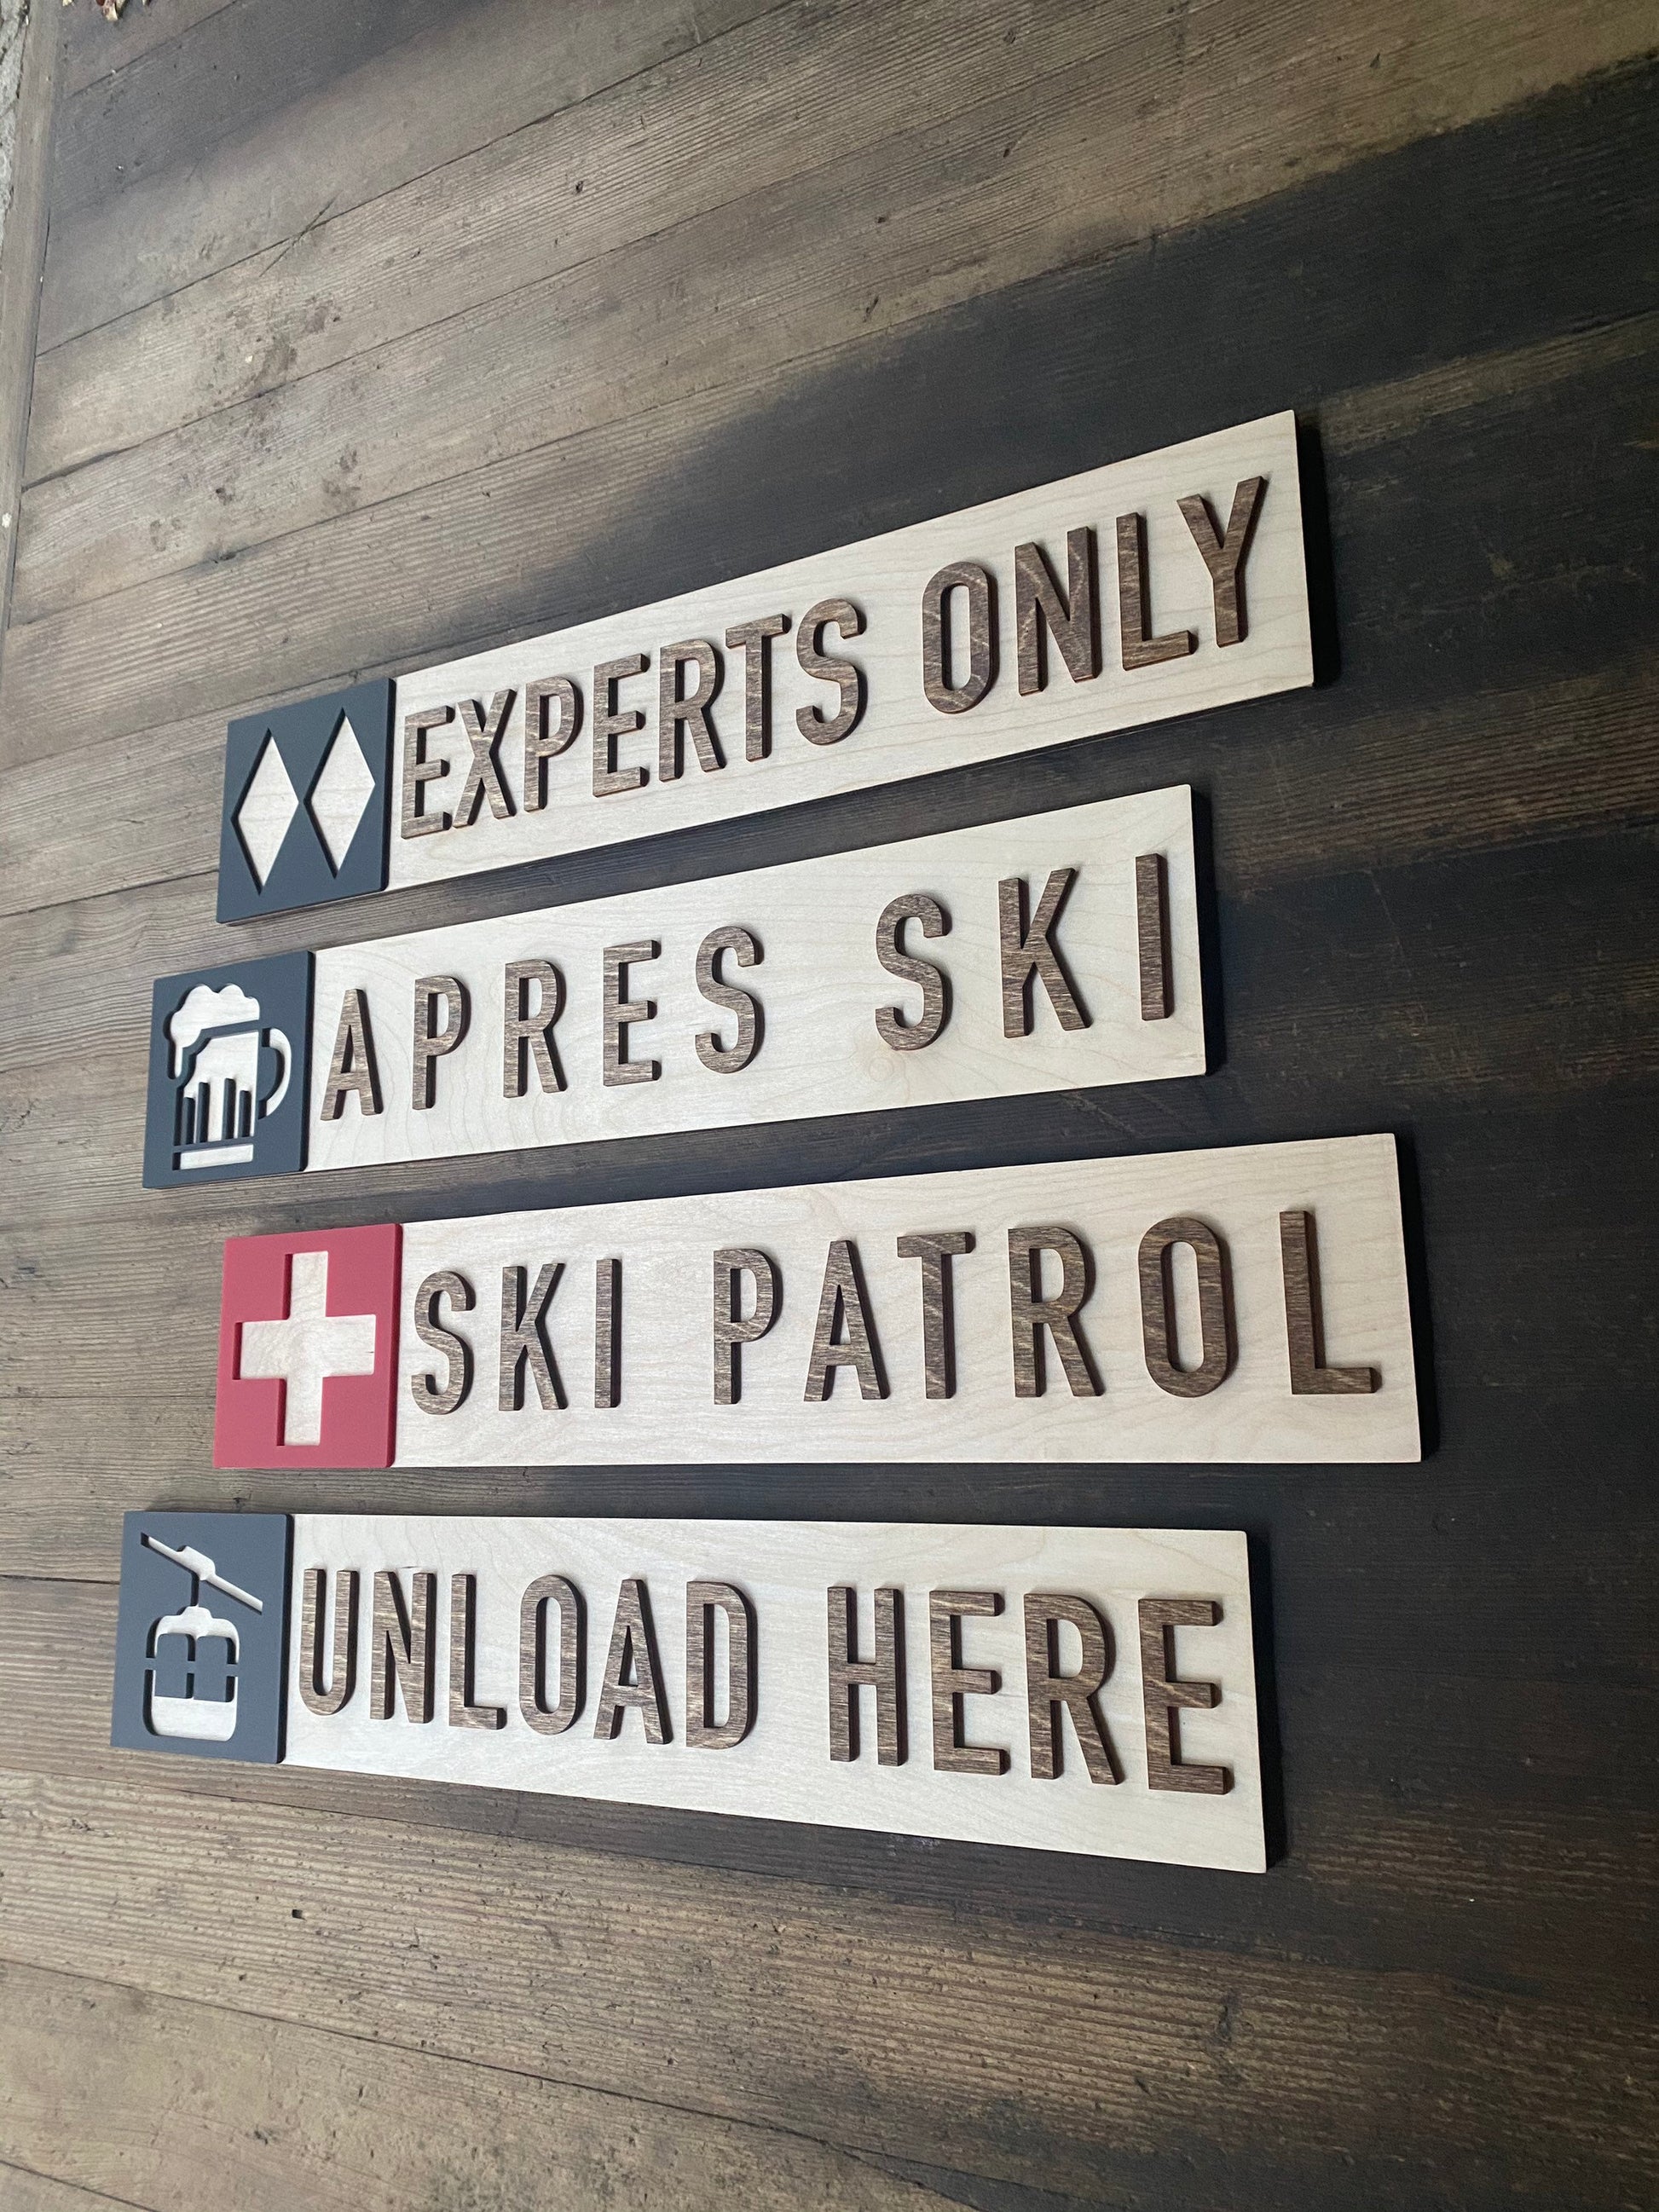 Ski Cabin Rustic Decor Signs | Choose your design Mountain Theme Snowboarding Wall Hanging | Apres Ski Experts Only Unload Here Ski Patrol